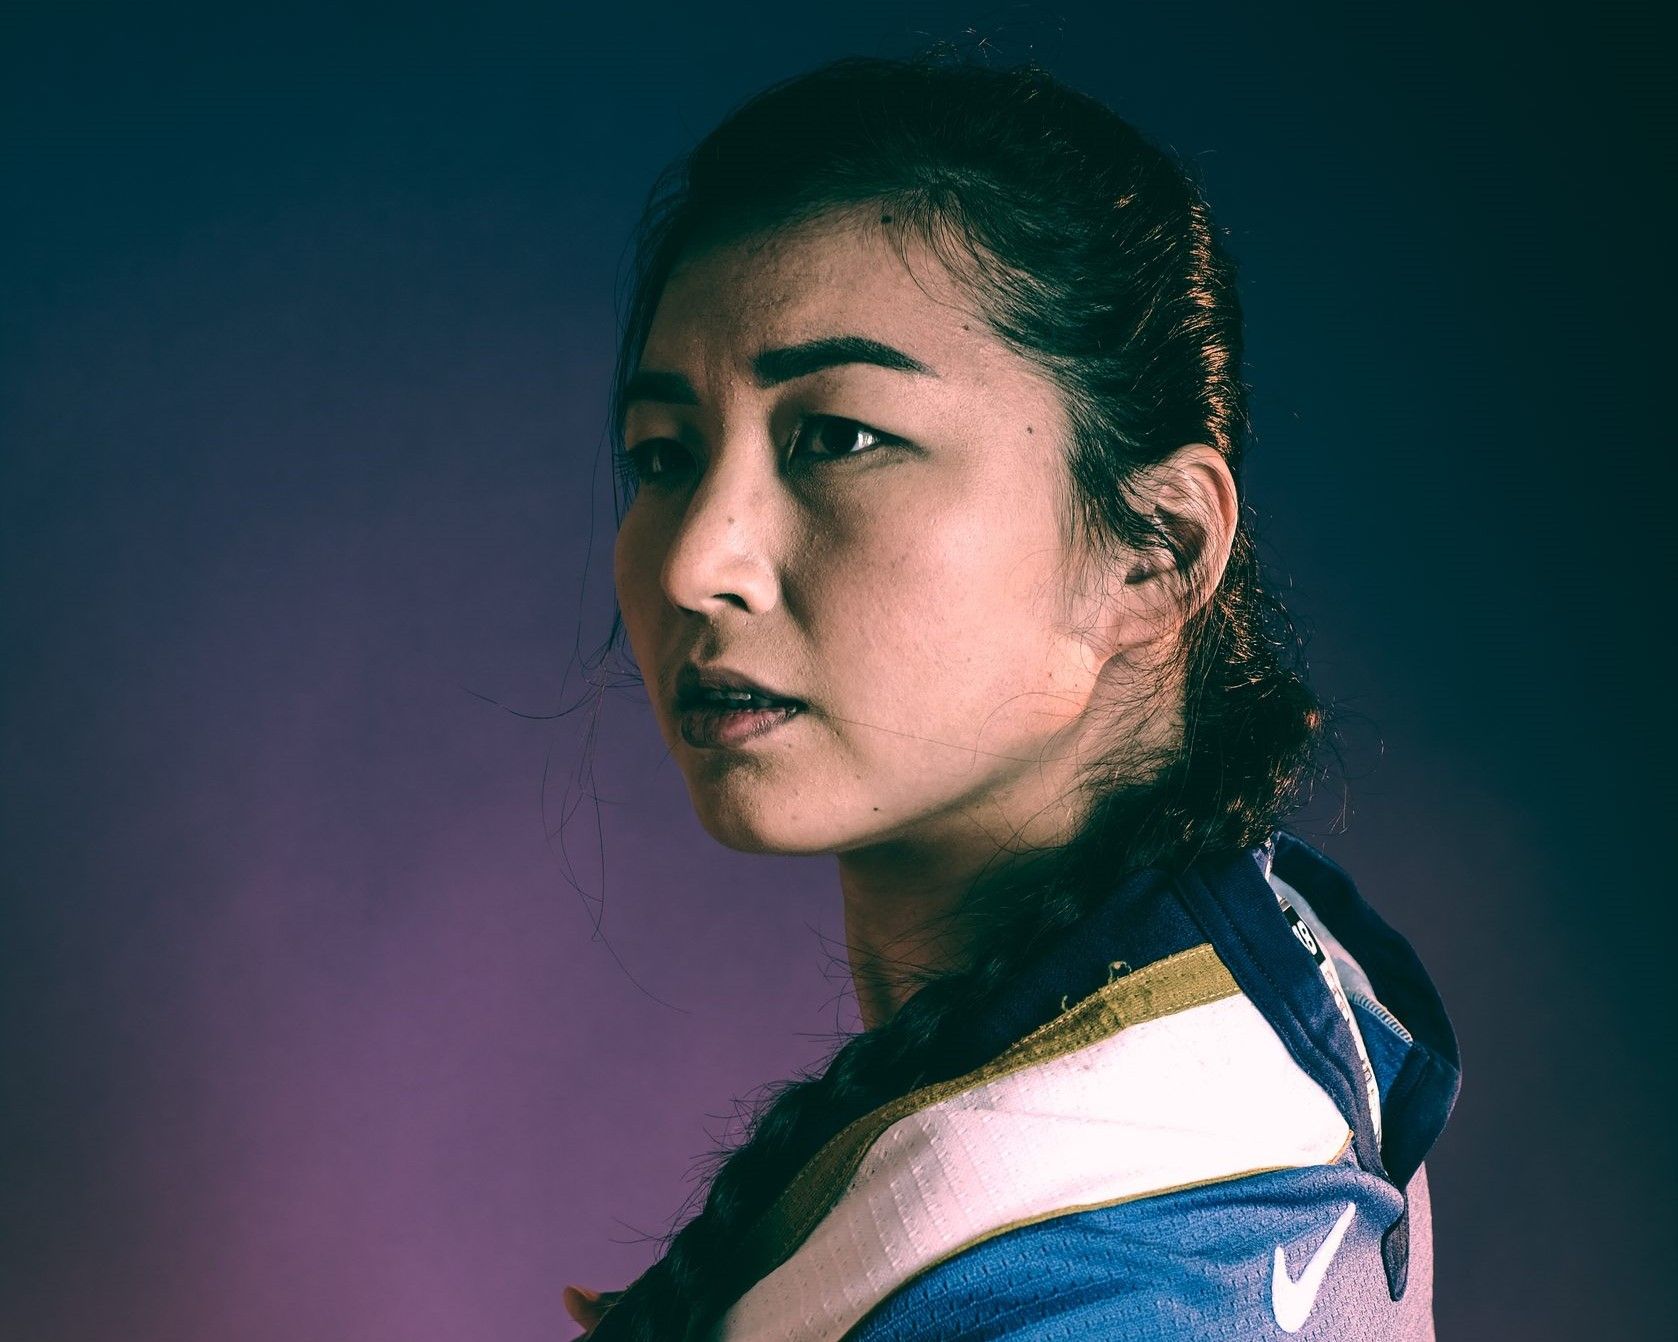 Bulbul Kartanbay on the Ups, Downs, and In-Betweens of North American Hockey